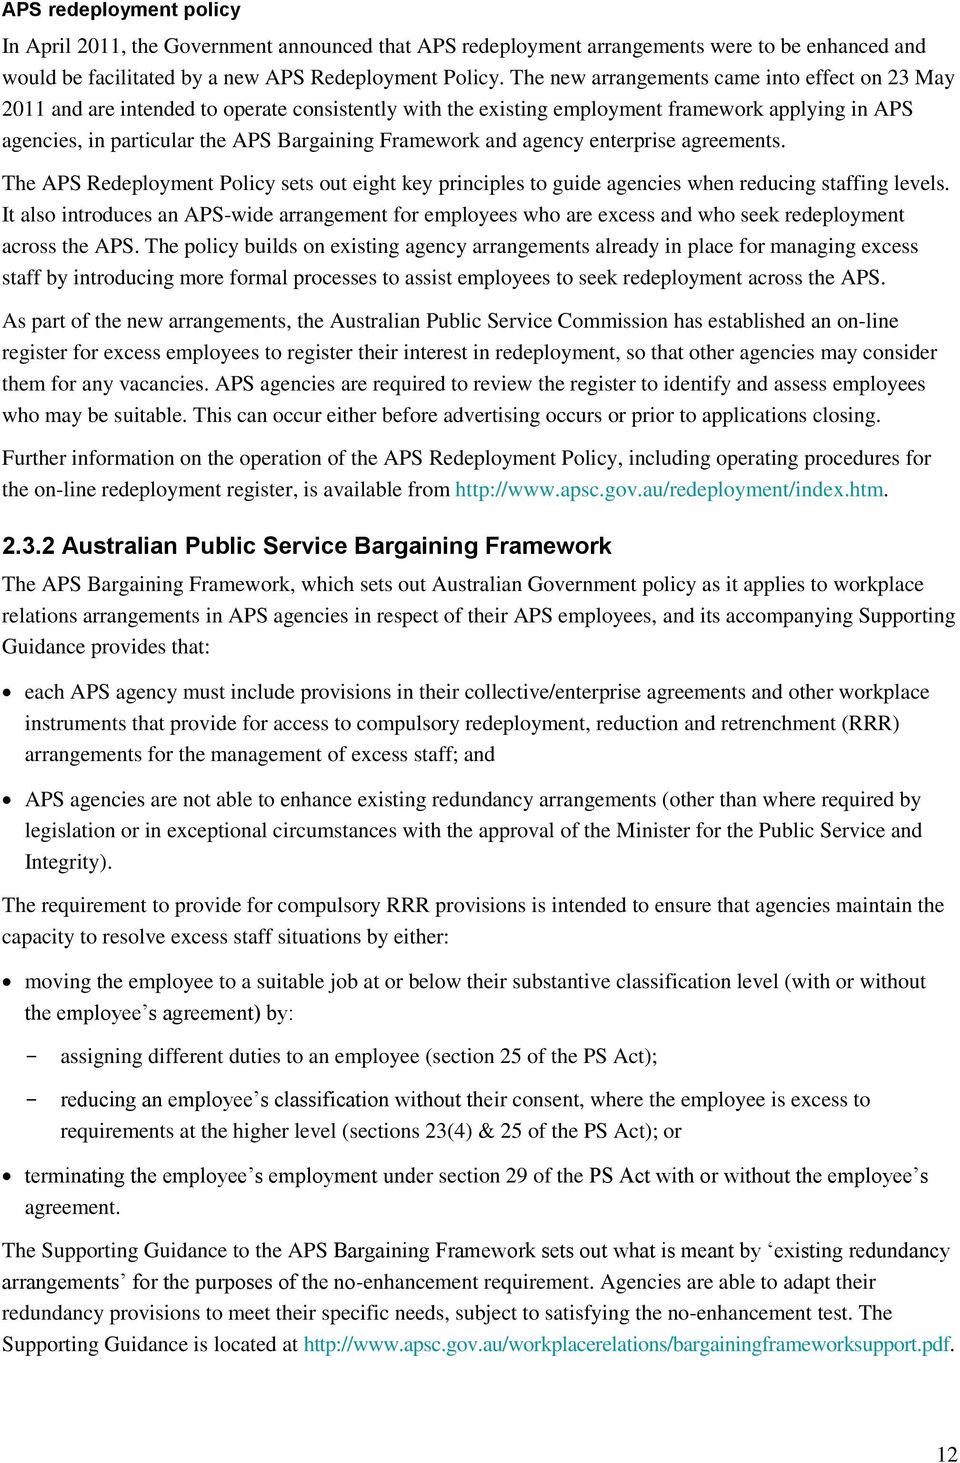 Framework and agency enterprise agreements. The APS Redeployment Policy sets out eight key principles to guide agencies when reducing staffing levels.